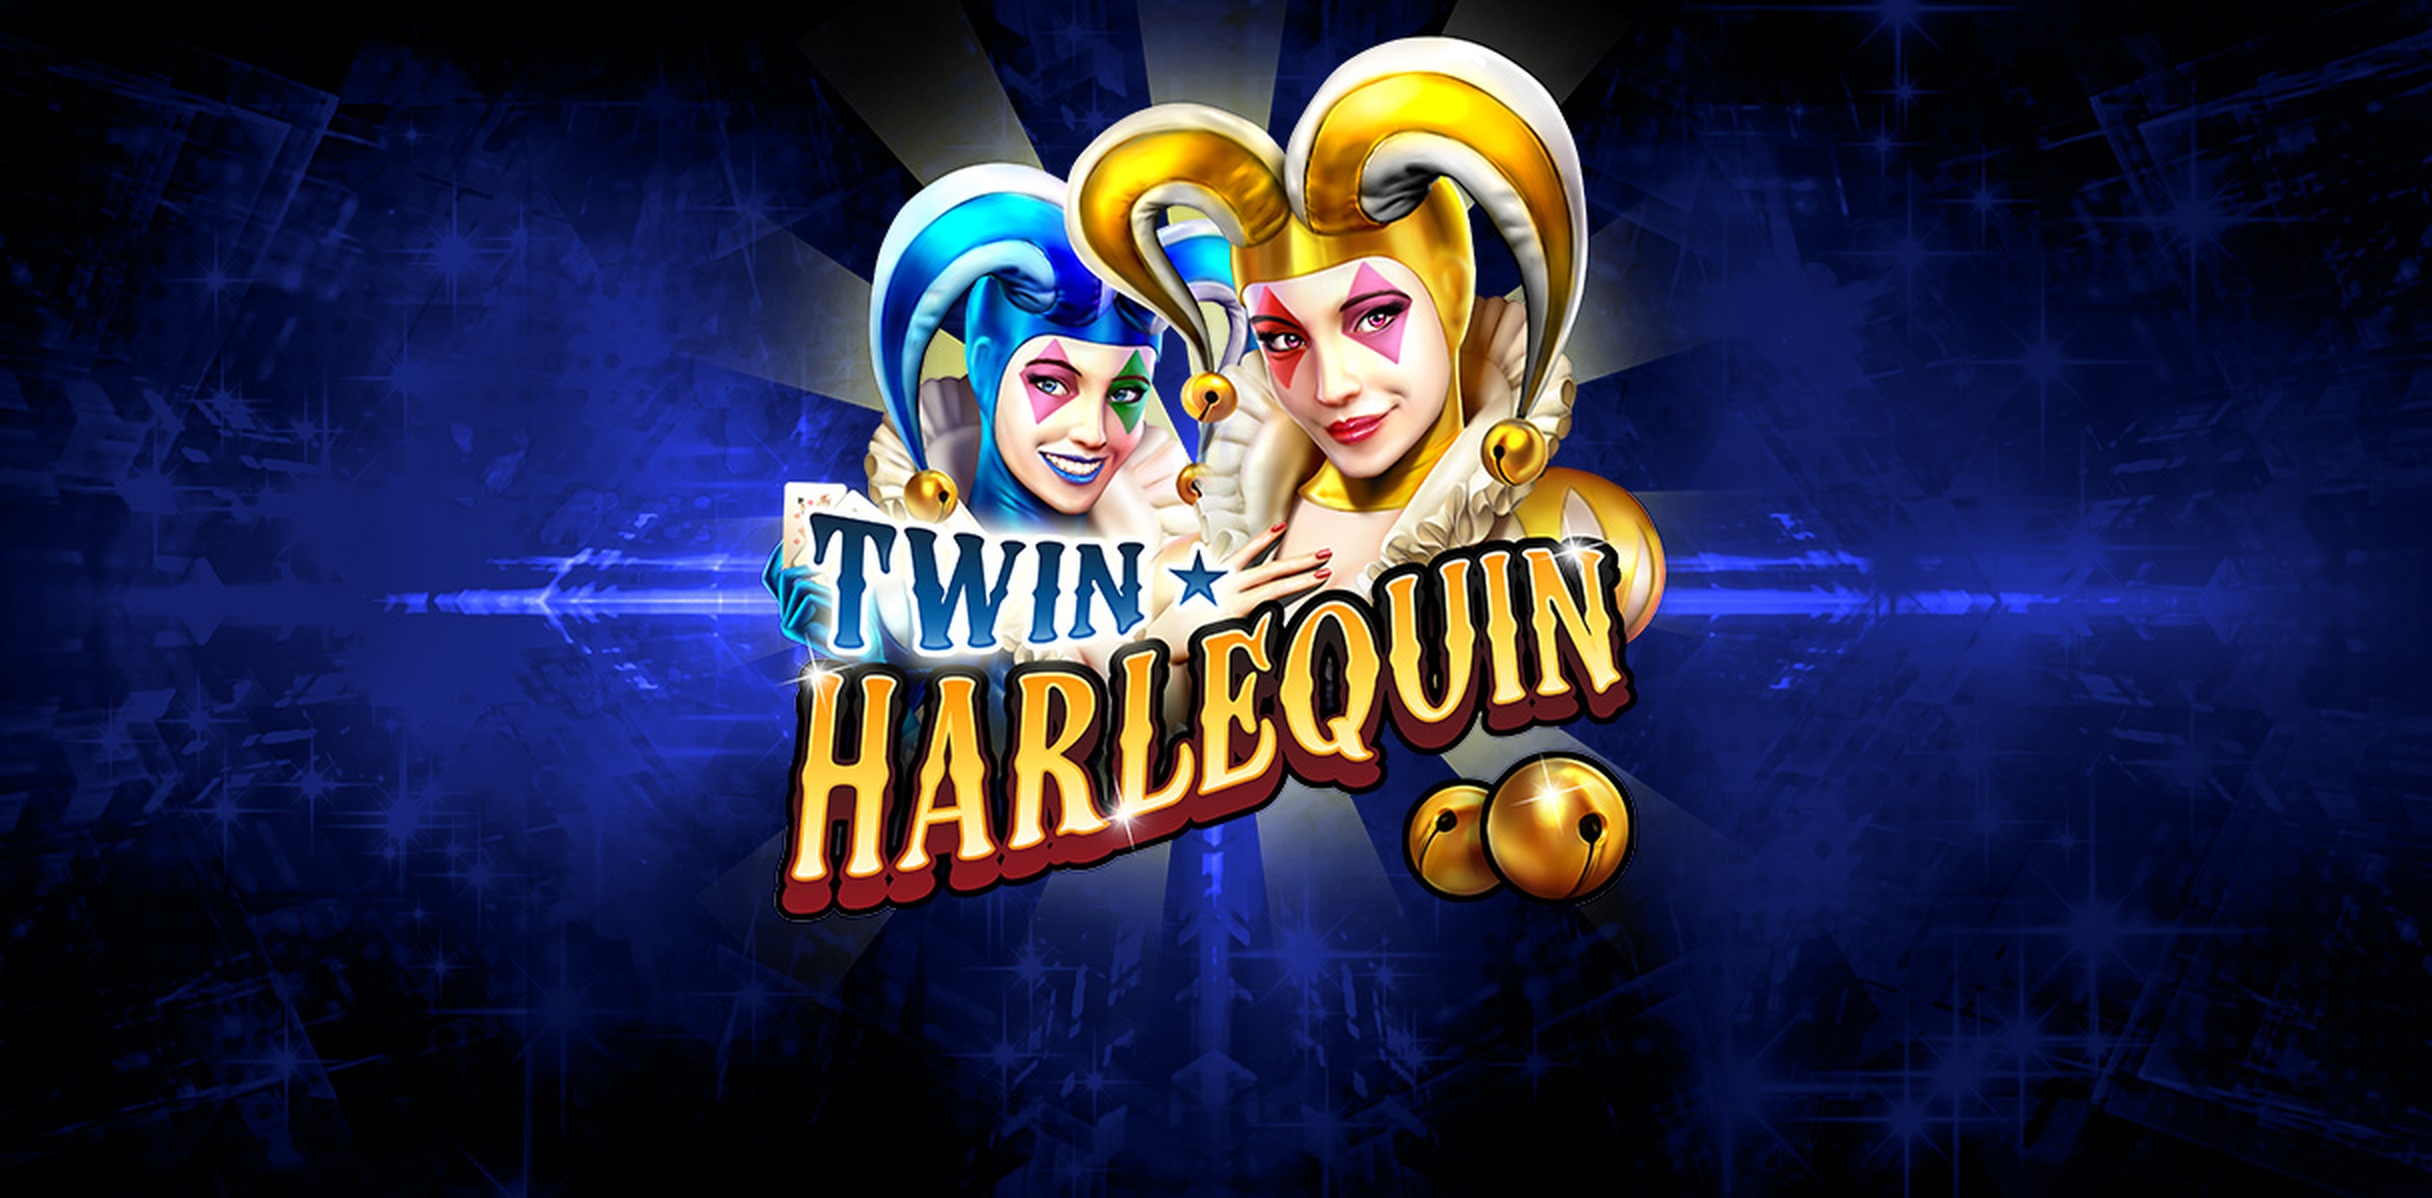 The Twin Harlequin Online Slot Demo Game by Red Rake Gaming